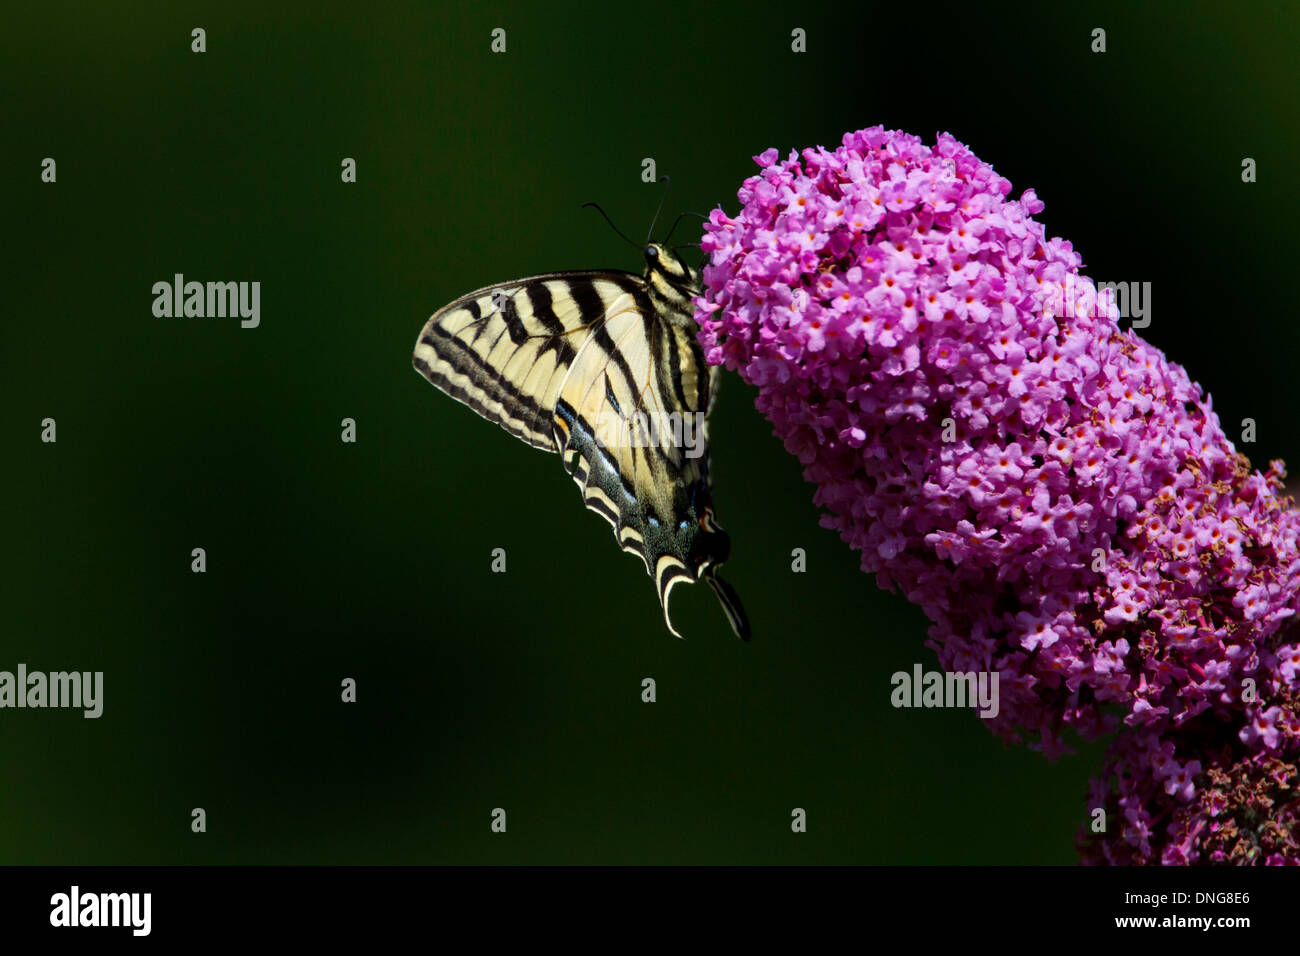 Western Tiger Swallowtail (Papilio rutulus) butterfly feeding on Buddleja flower in Nanaimo, Vancouver Island, BC,Canada in July Stock Photo